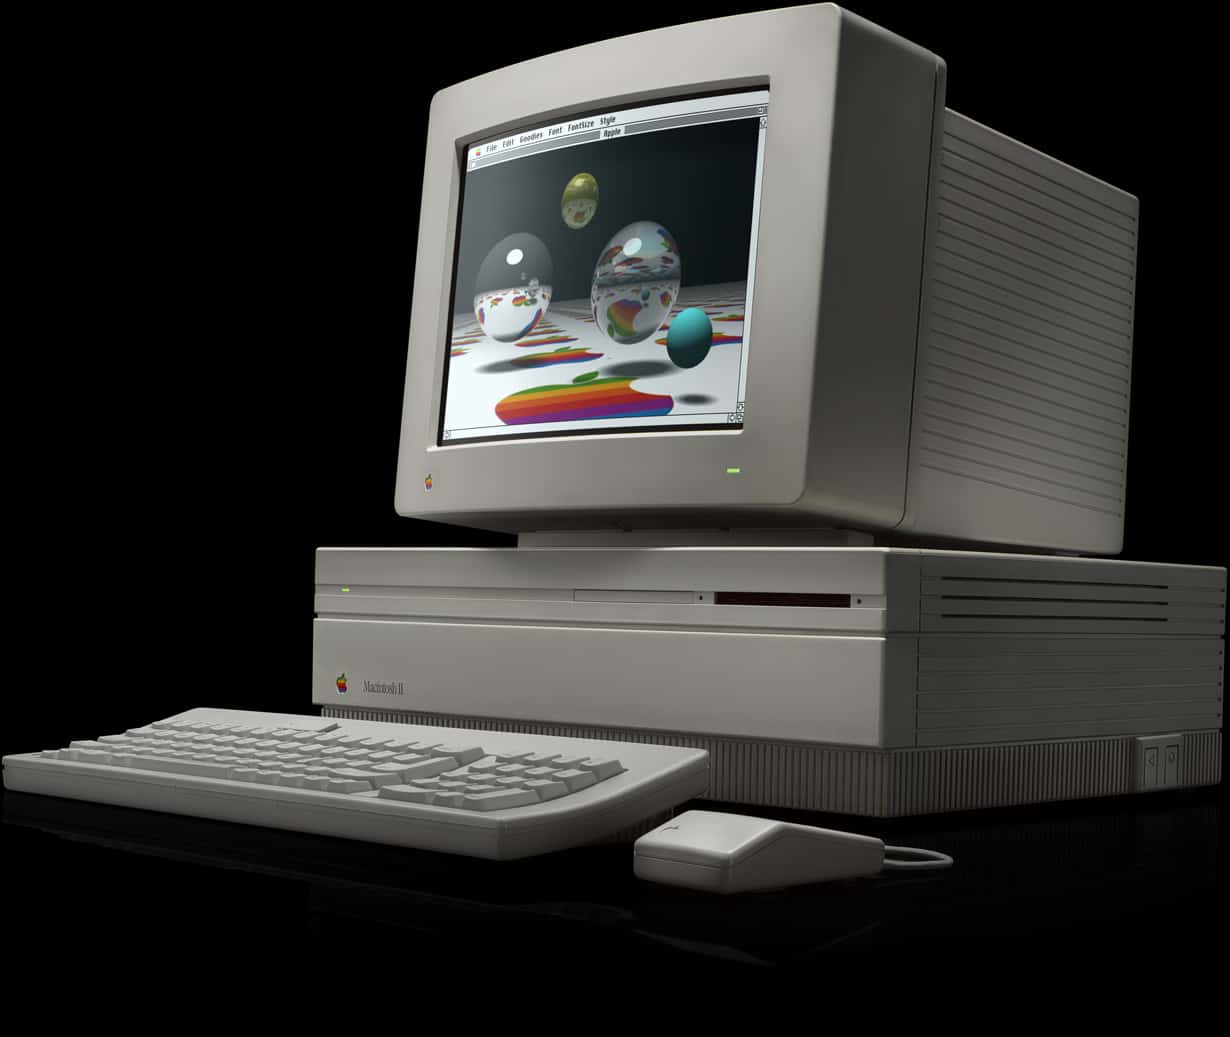 The Mac II was an enormously impressive machine for its day.